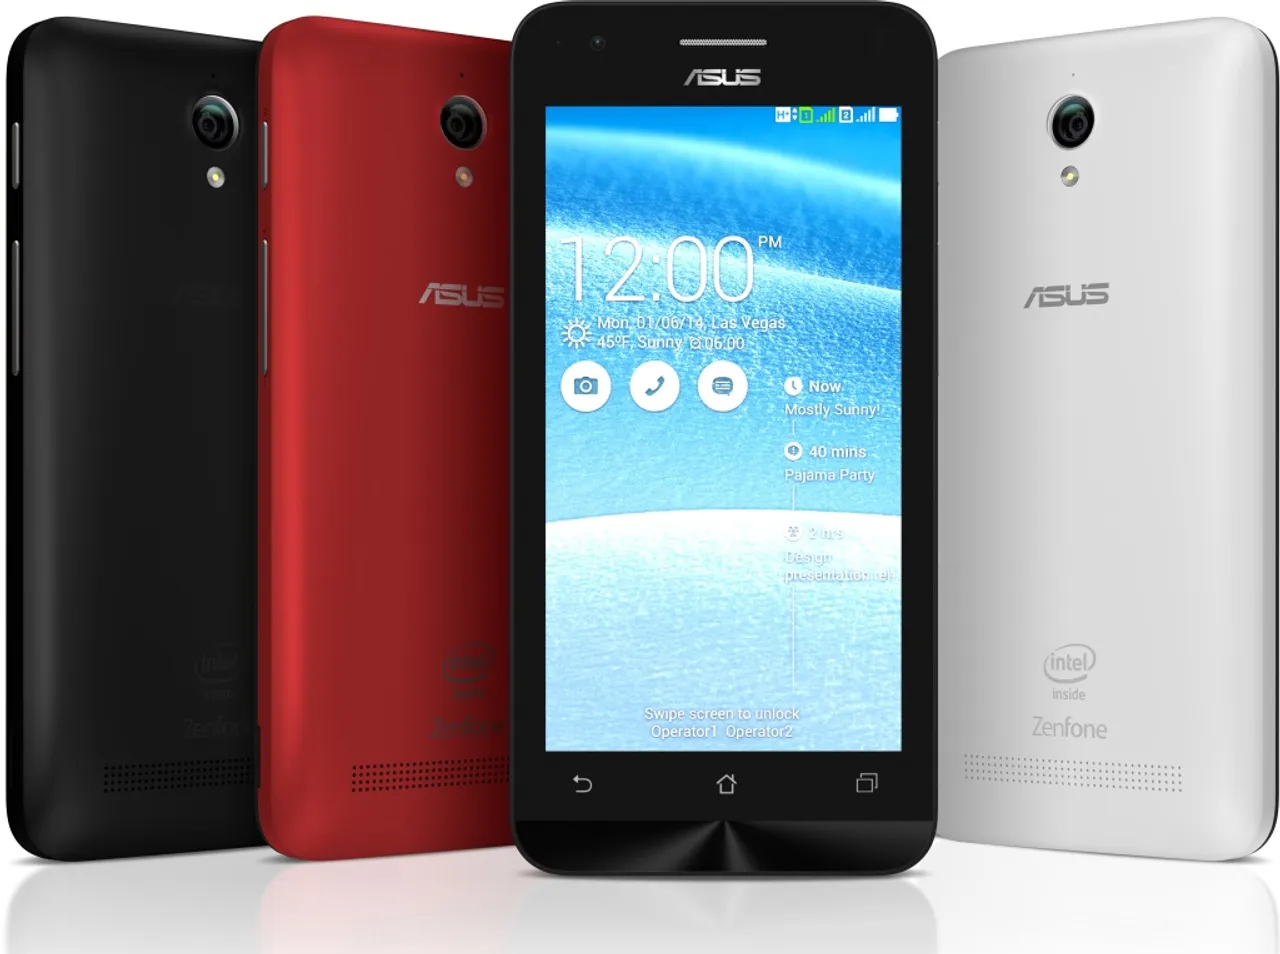 ASUS brings its latest budget smartphone Zenfone C at a price of Rs. 5,999/-